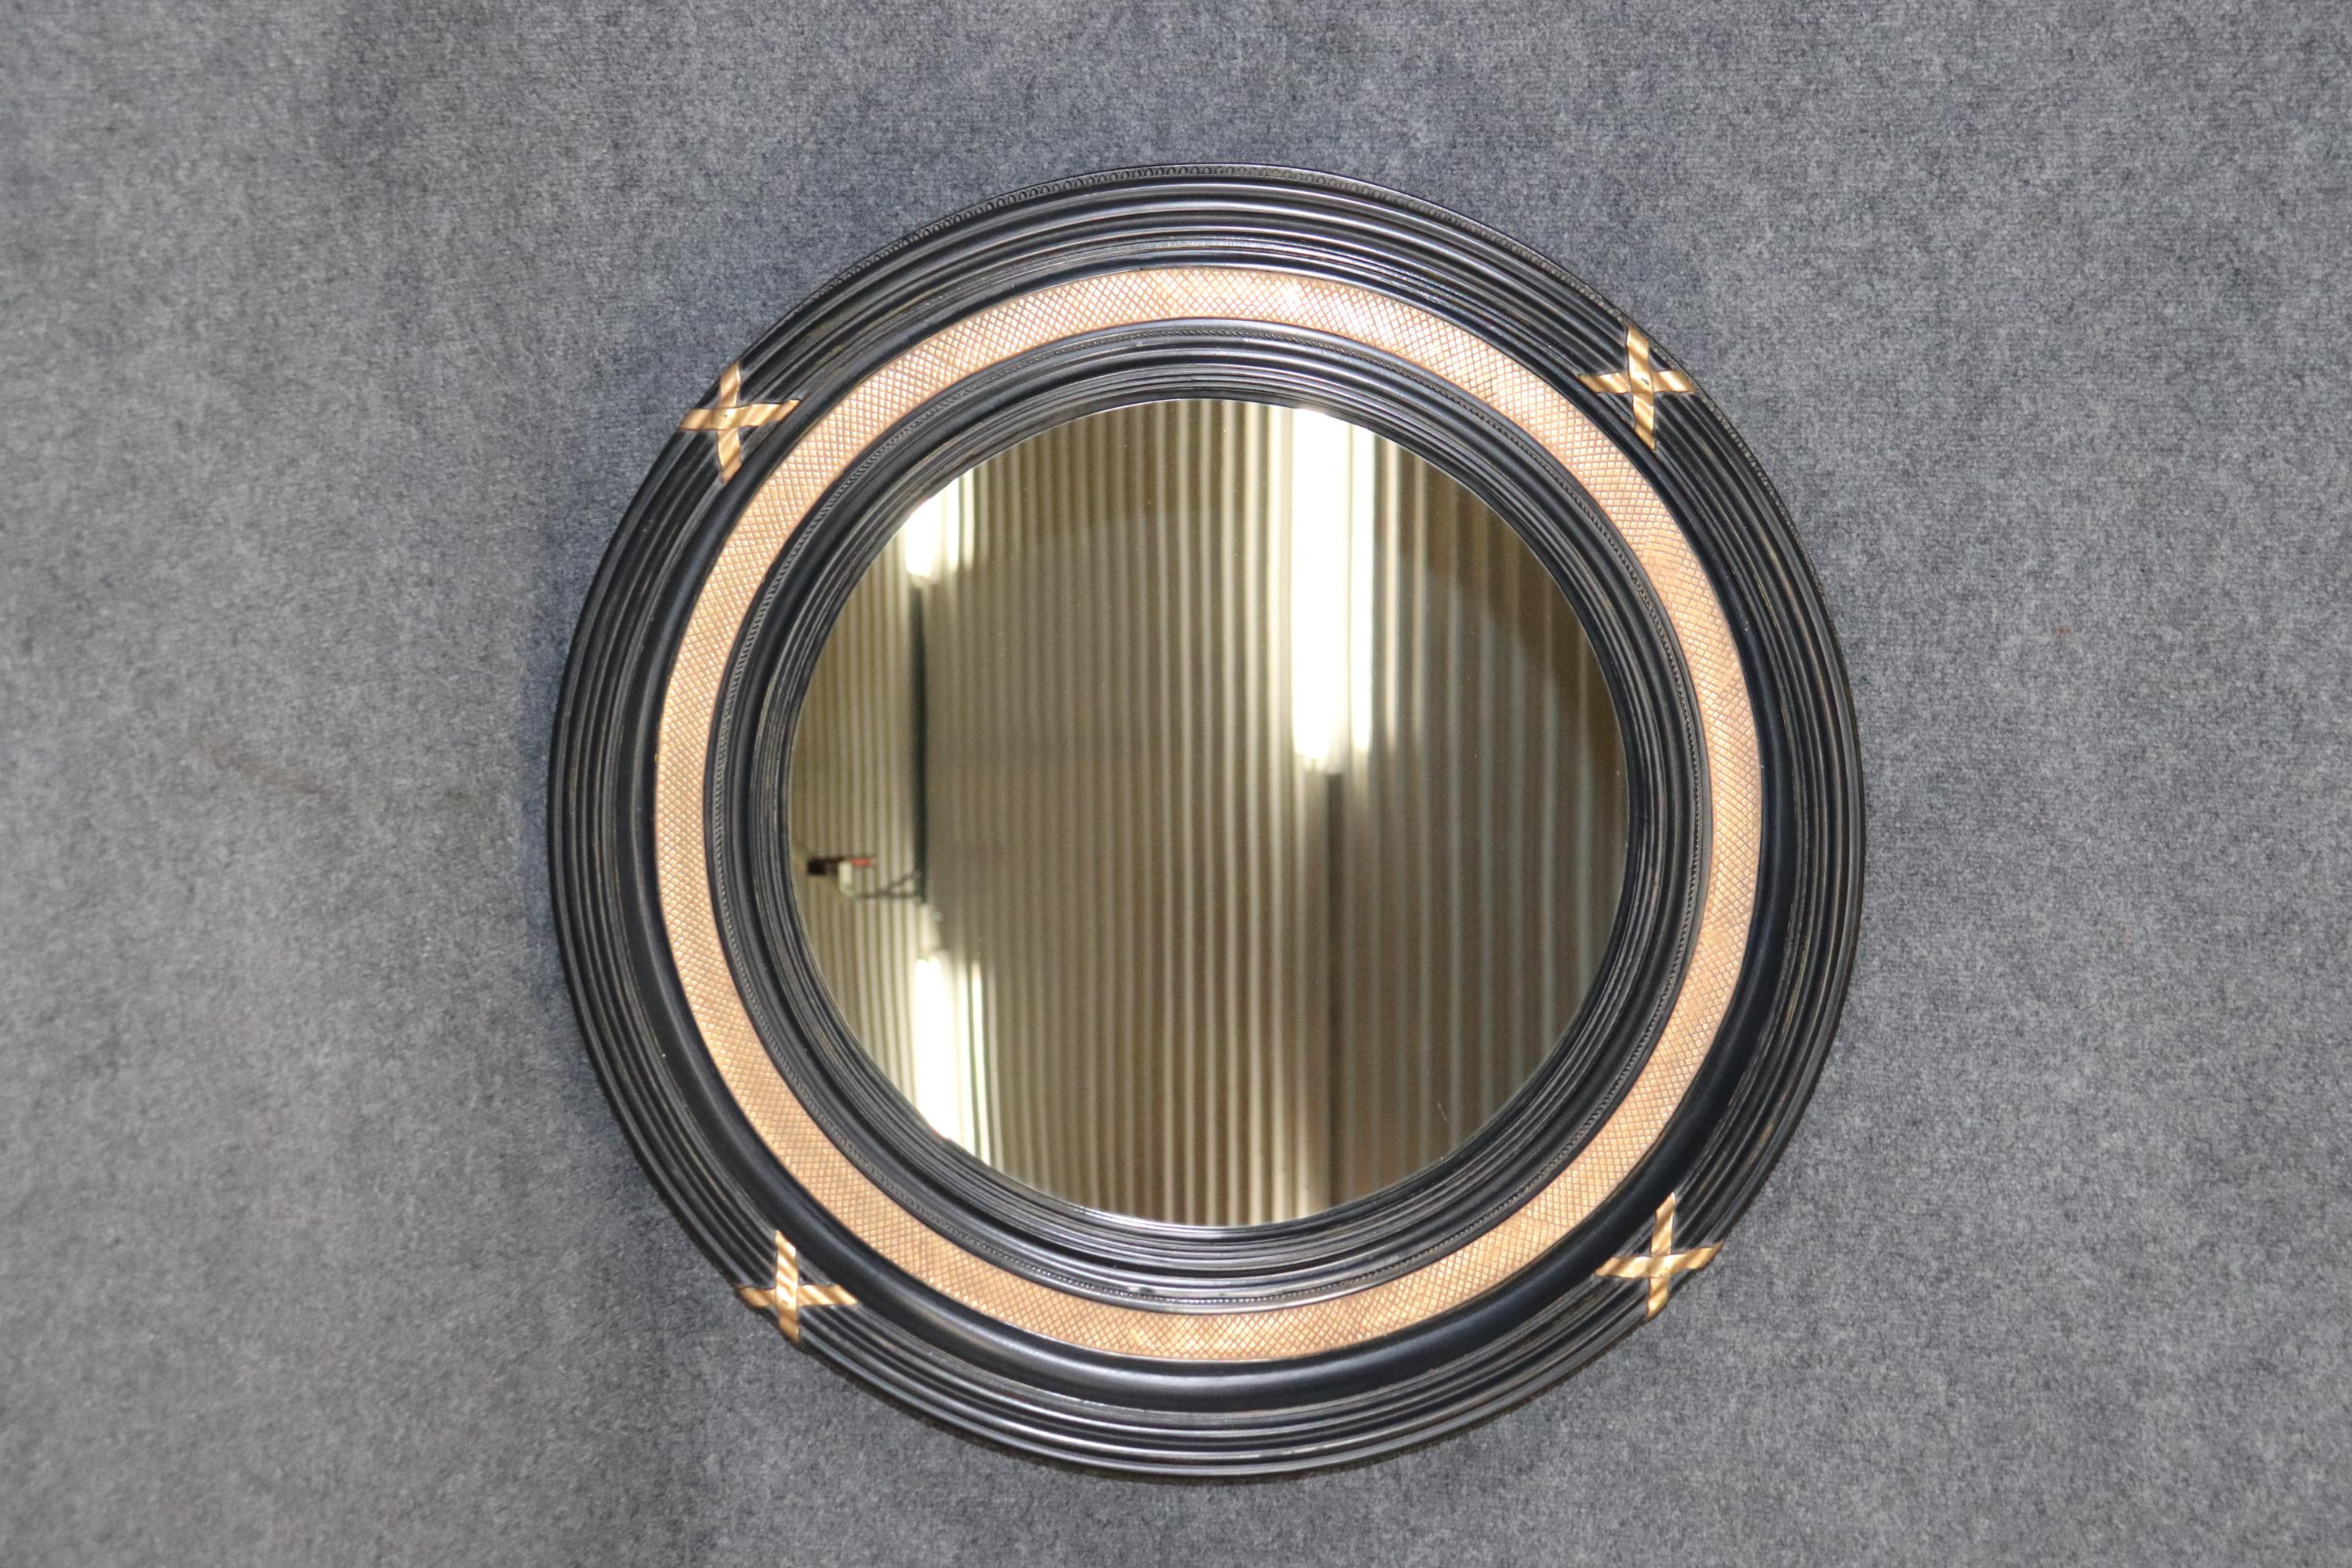 This is a beautiful ebonized and gilded wall mirror in the directoire taste. The mirror measures 33.25 x 33.25 x 4.5 deep.